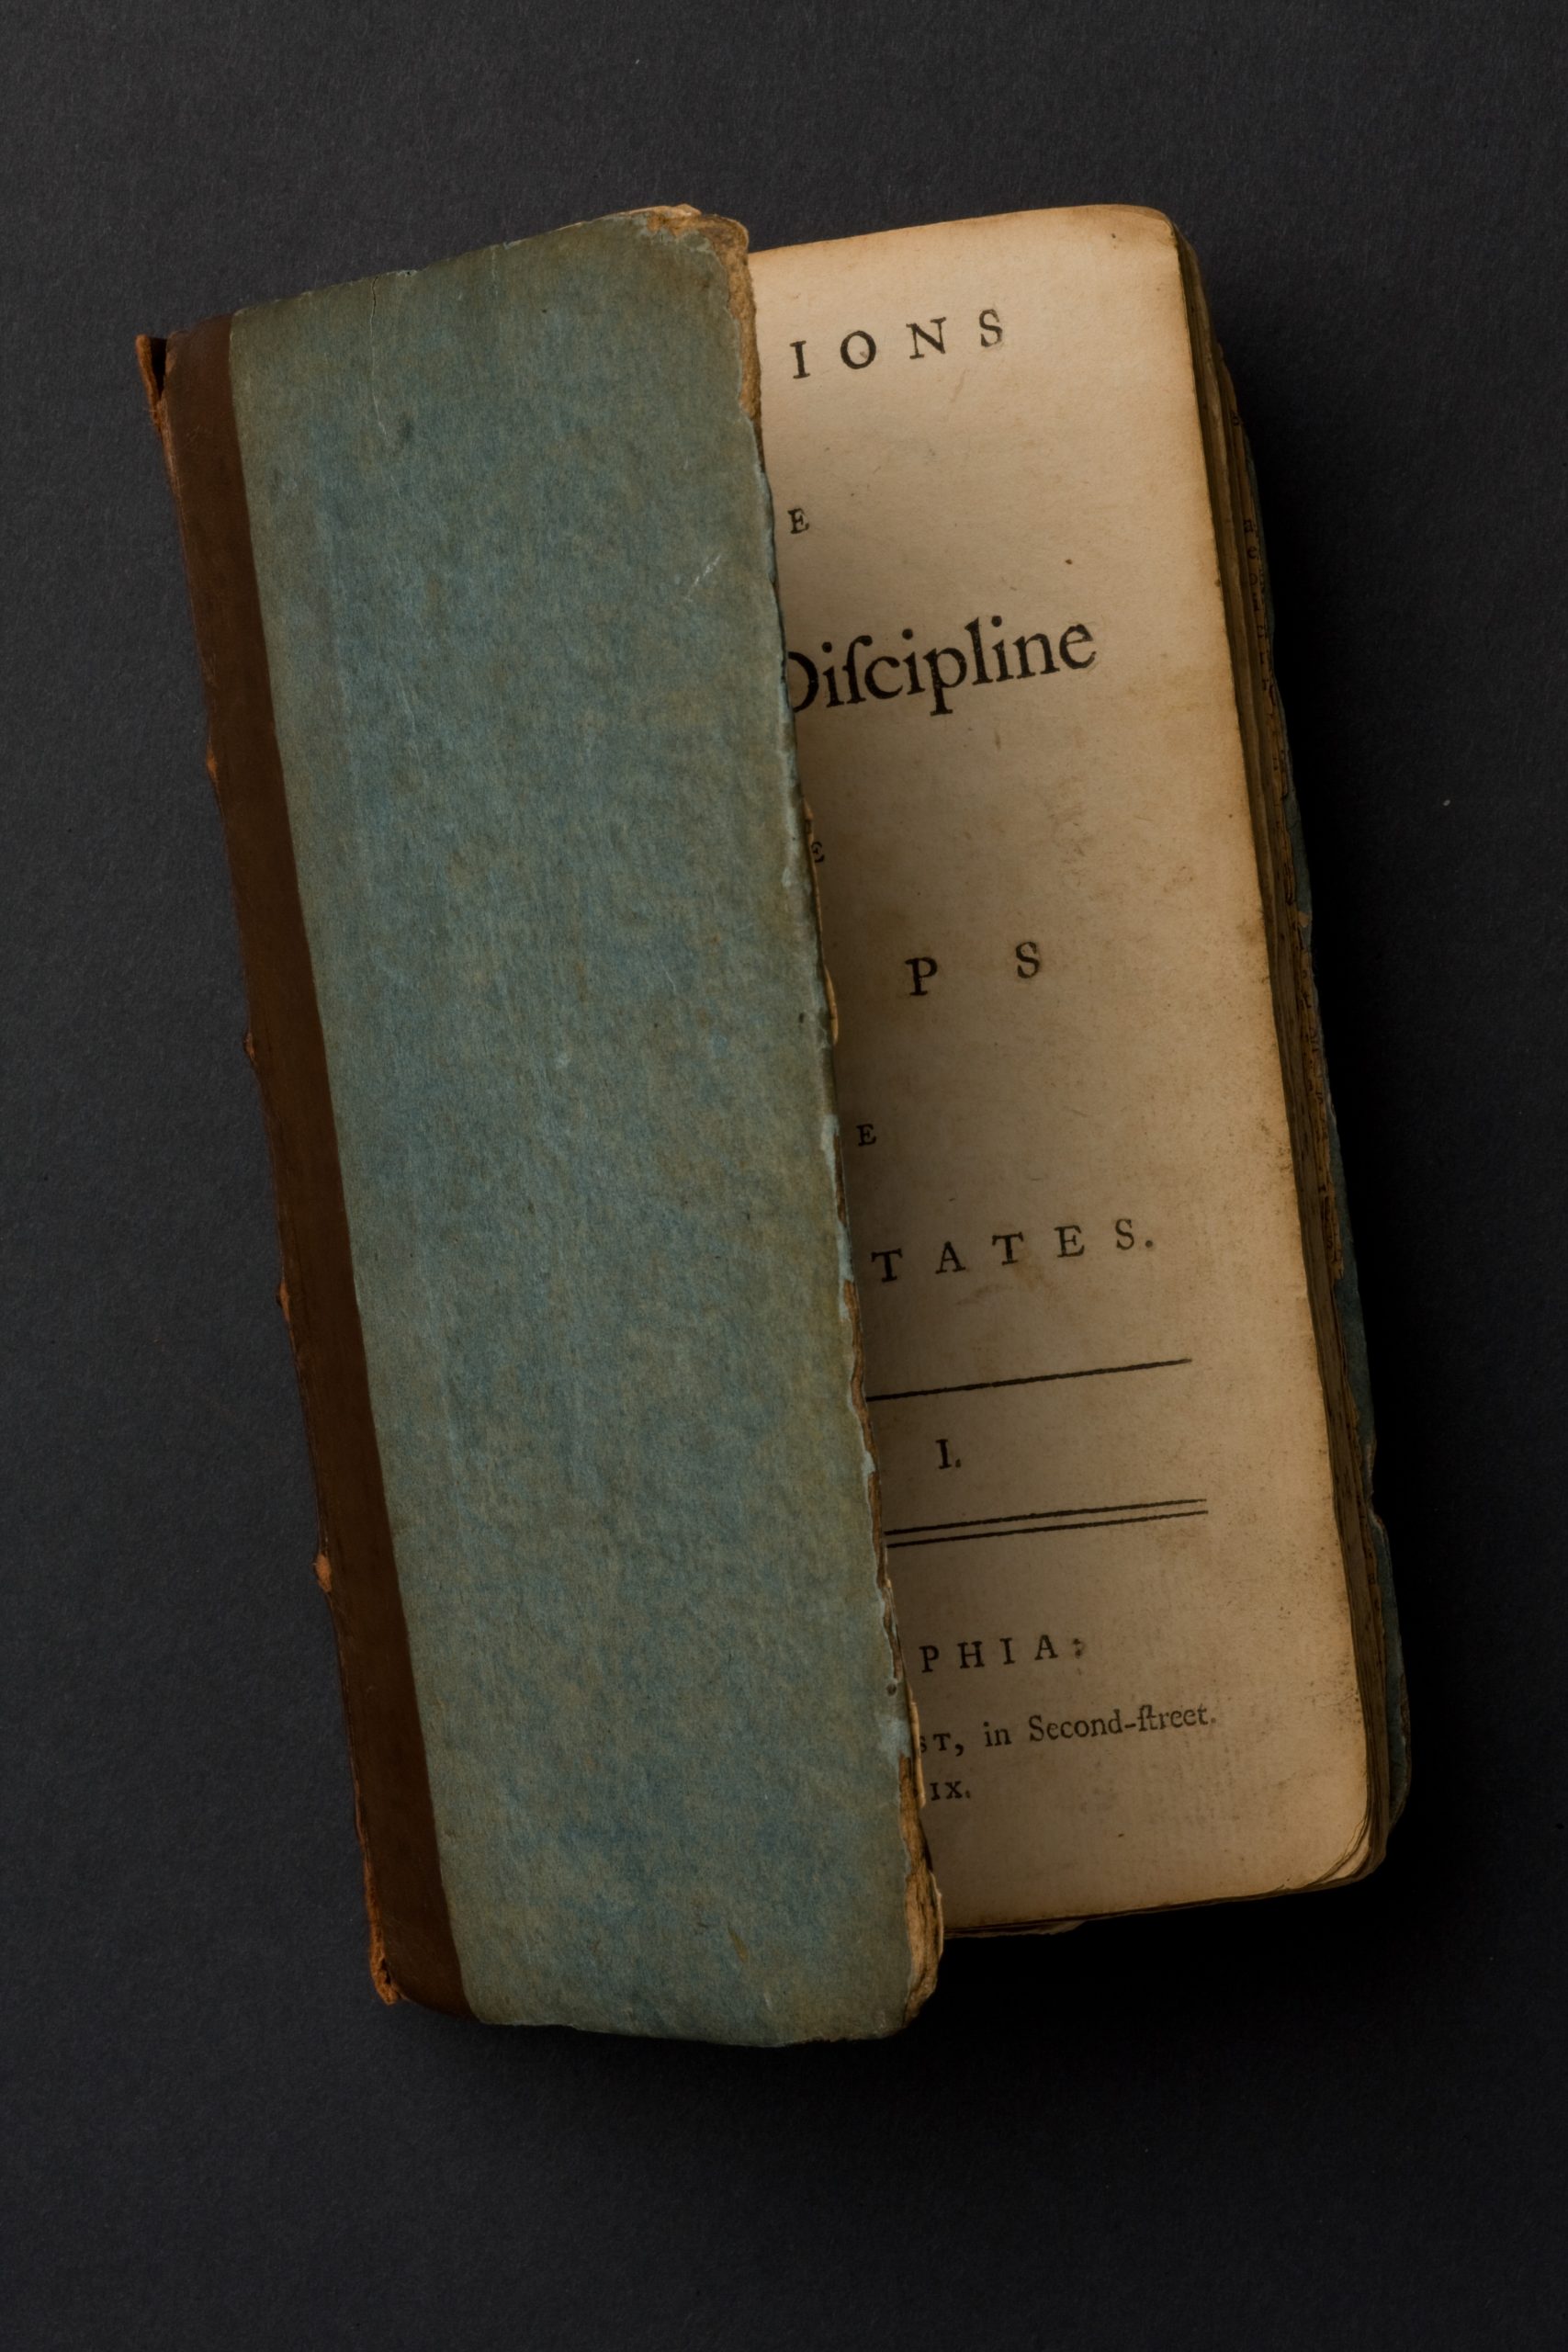 The blue paper-covered board binding of Baron von Steuben's Regulations for the Order and Discipline of the Troops